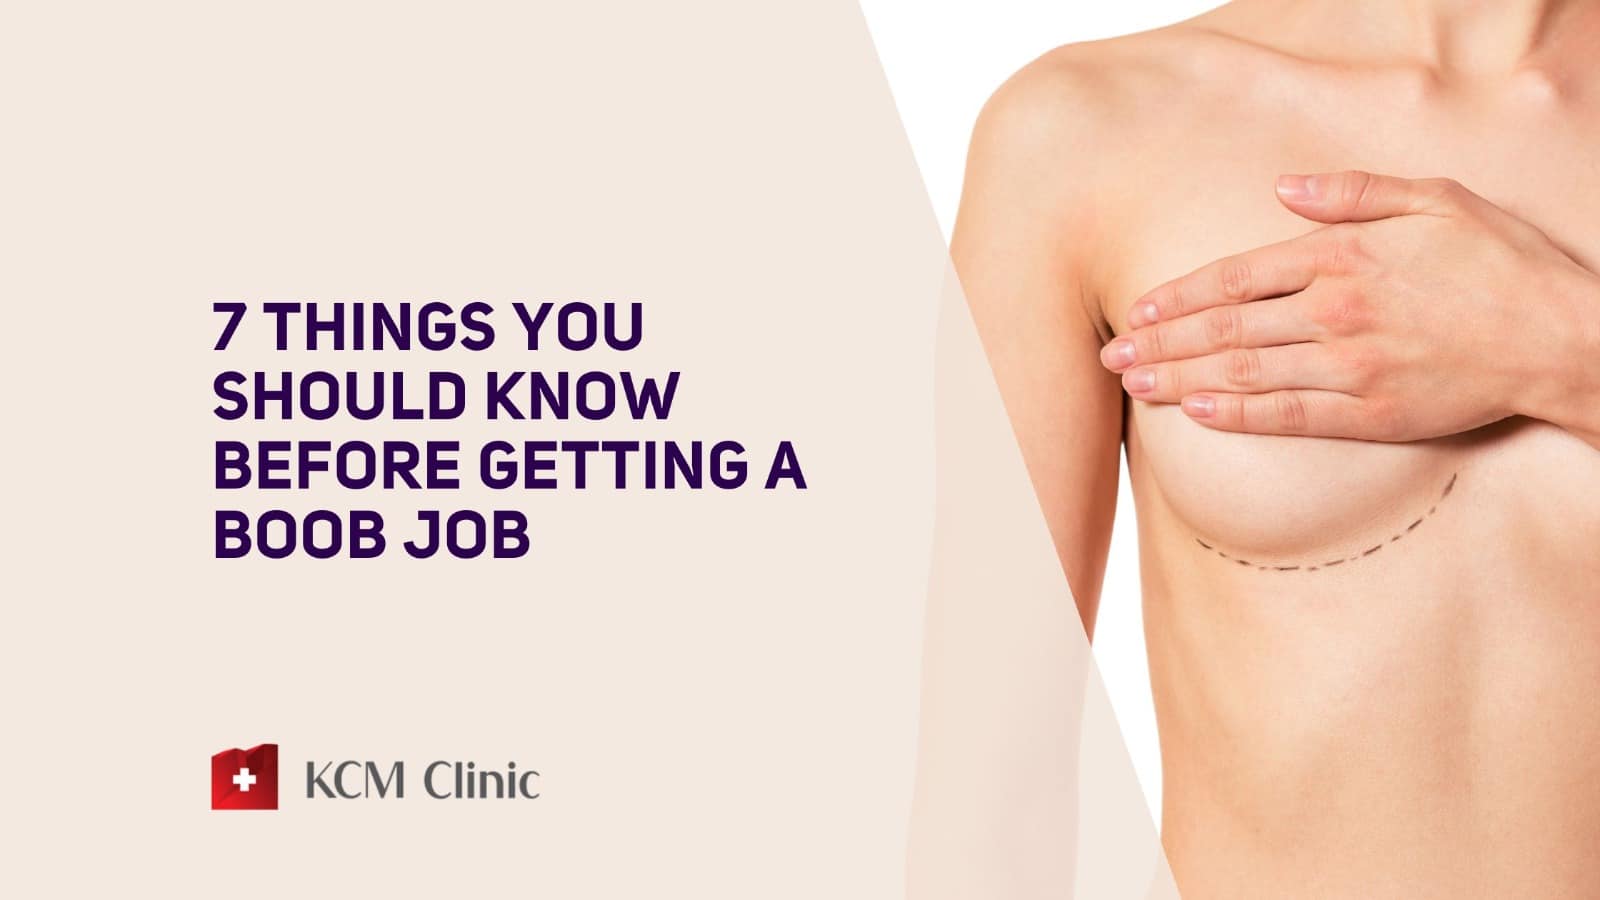 Everything You Need To Know Before Getting A Temporary Boob Job